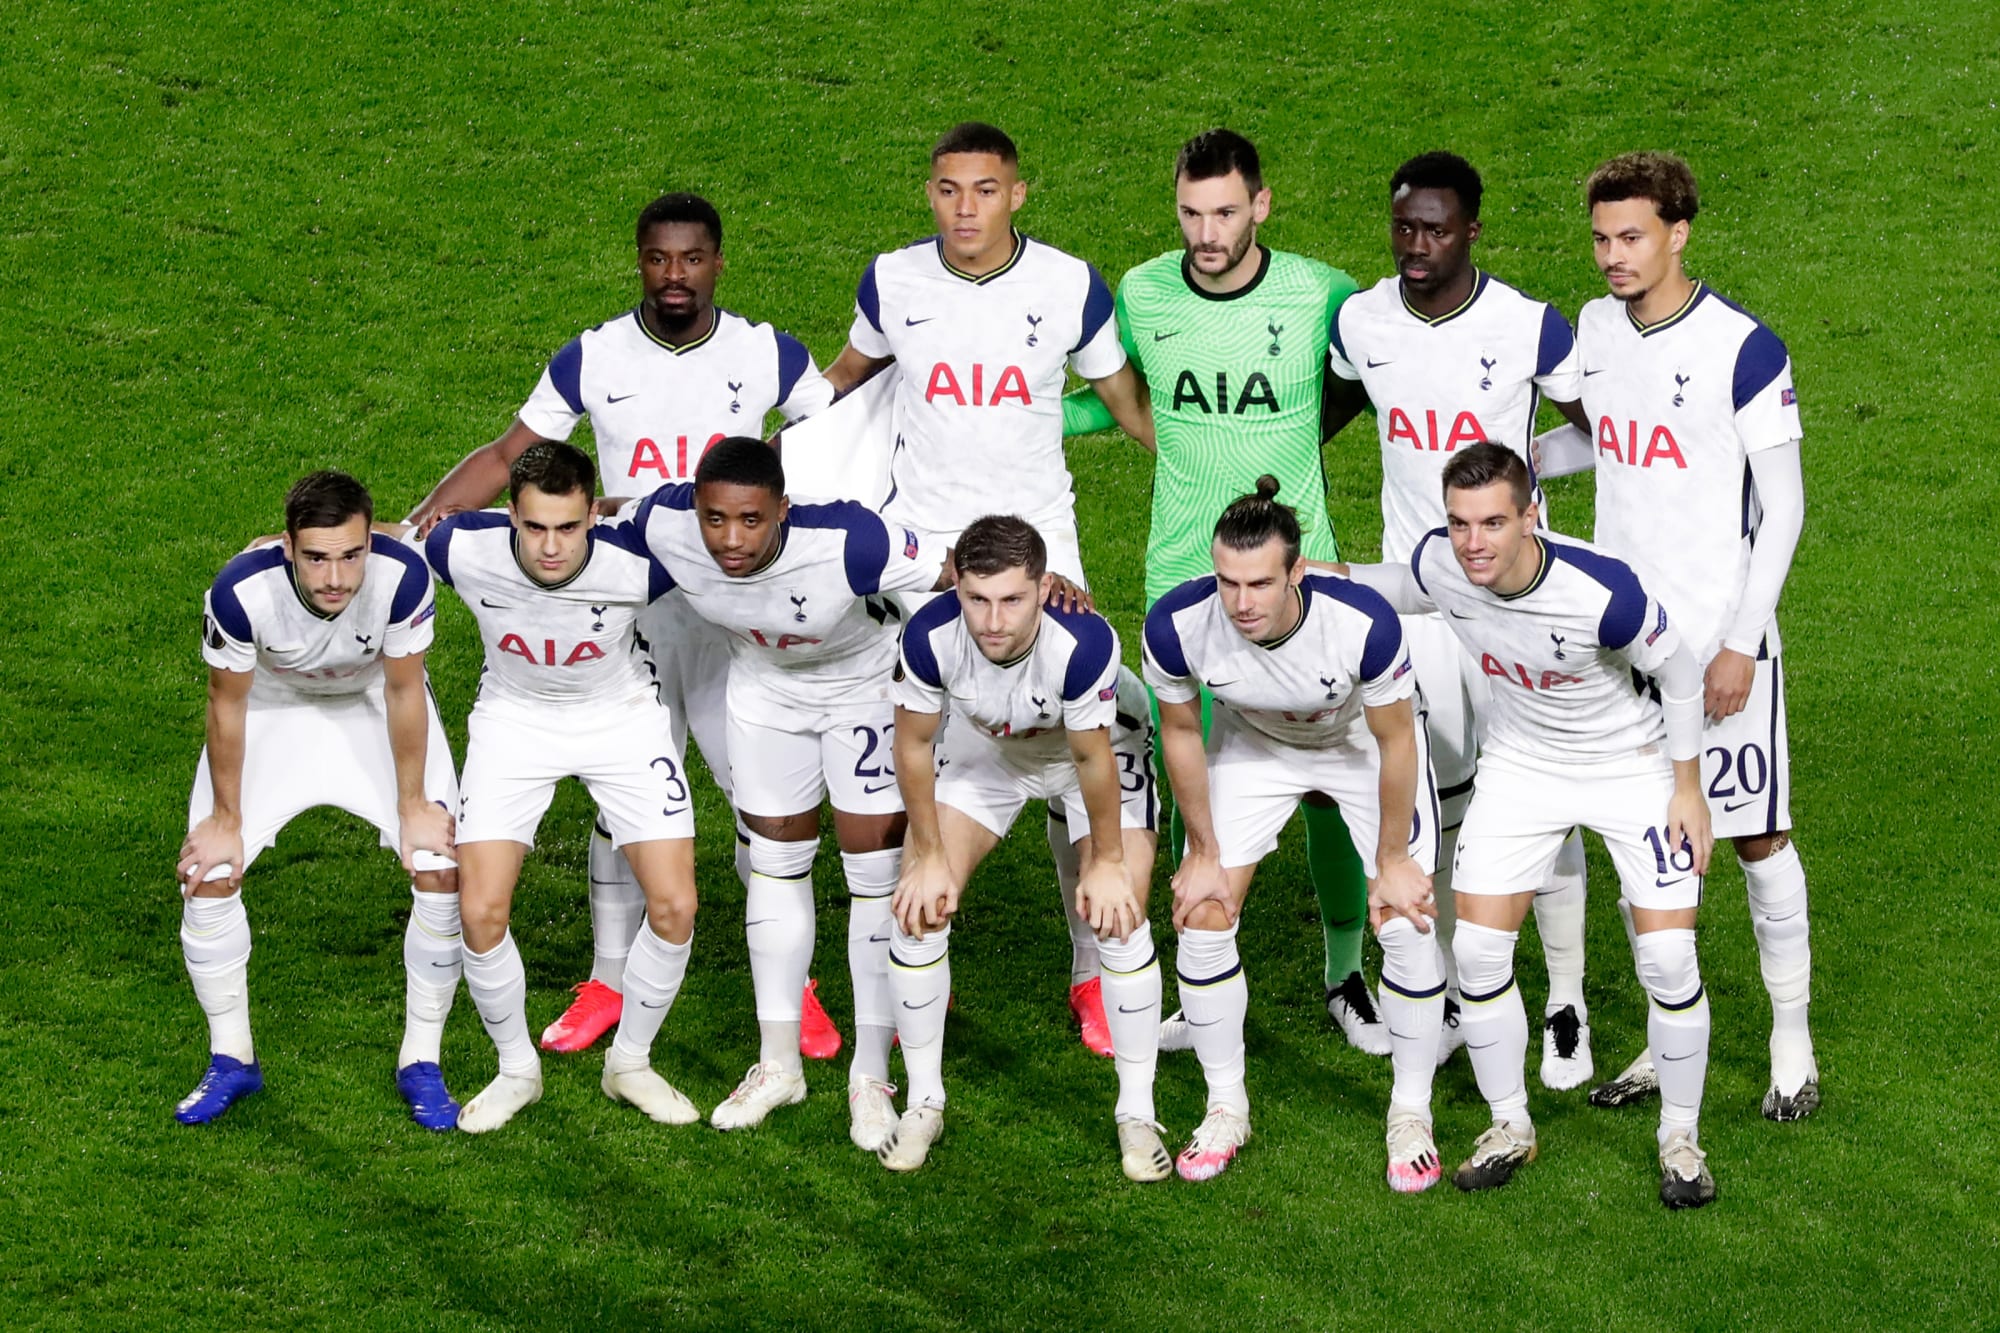 Looking at the Europa League Round of 16 Draw for Tottenham